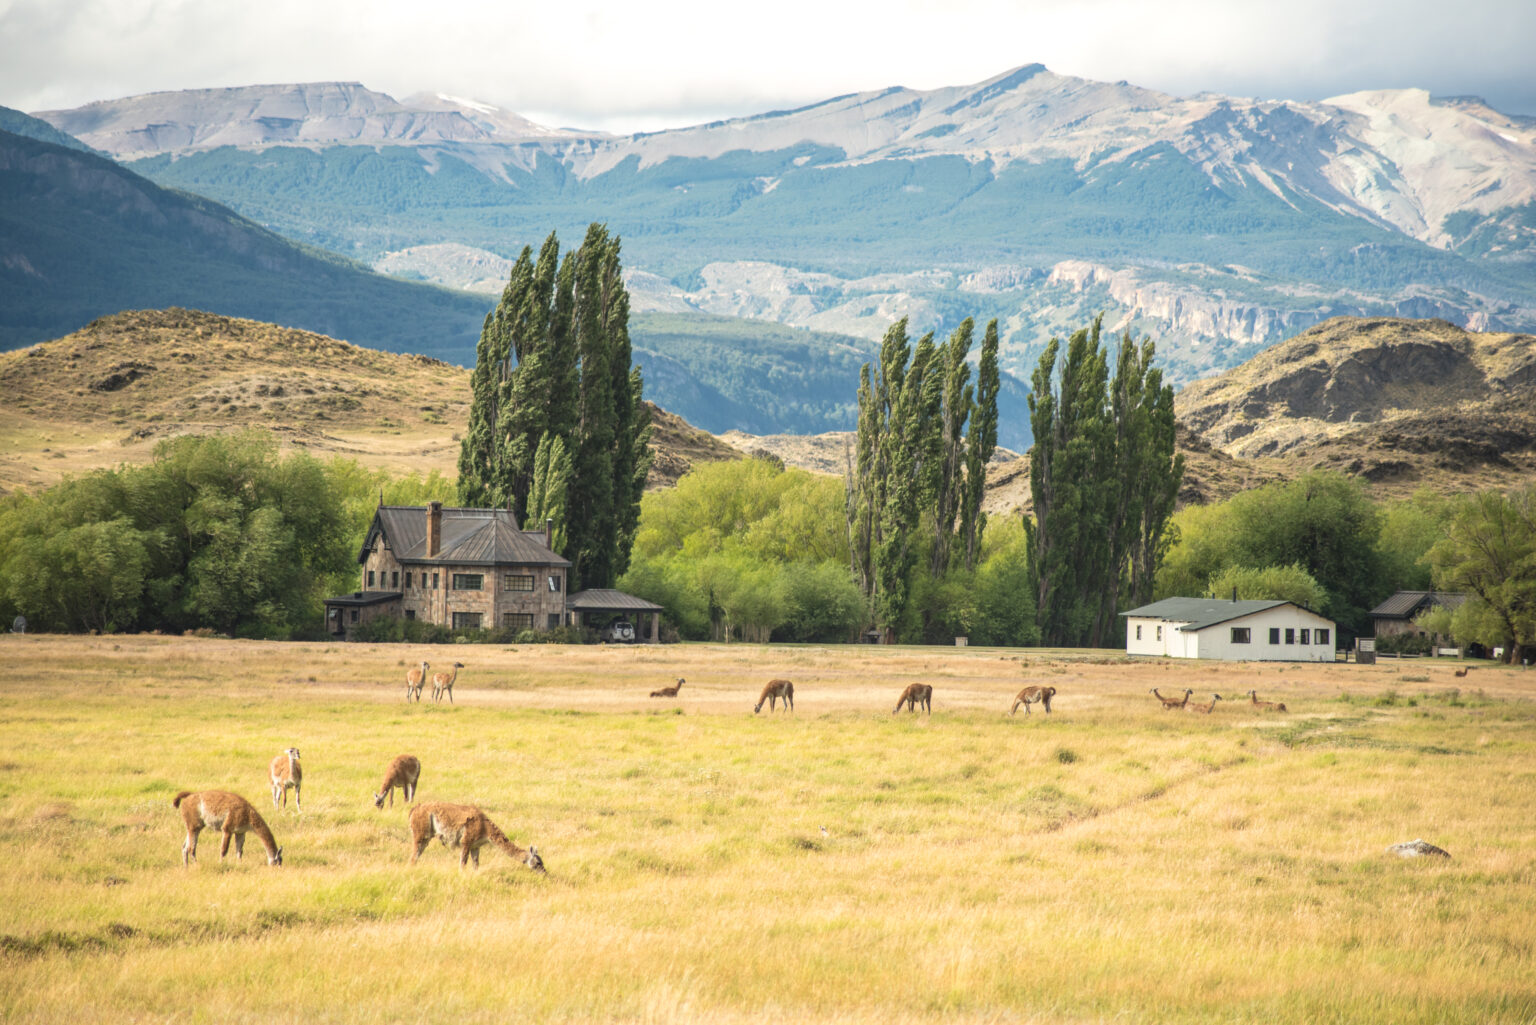 Scene with guanacos in the foreground, a stone house and a wooden house in the background with poplar trees, in front of mountains